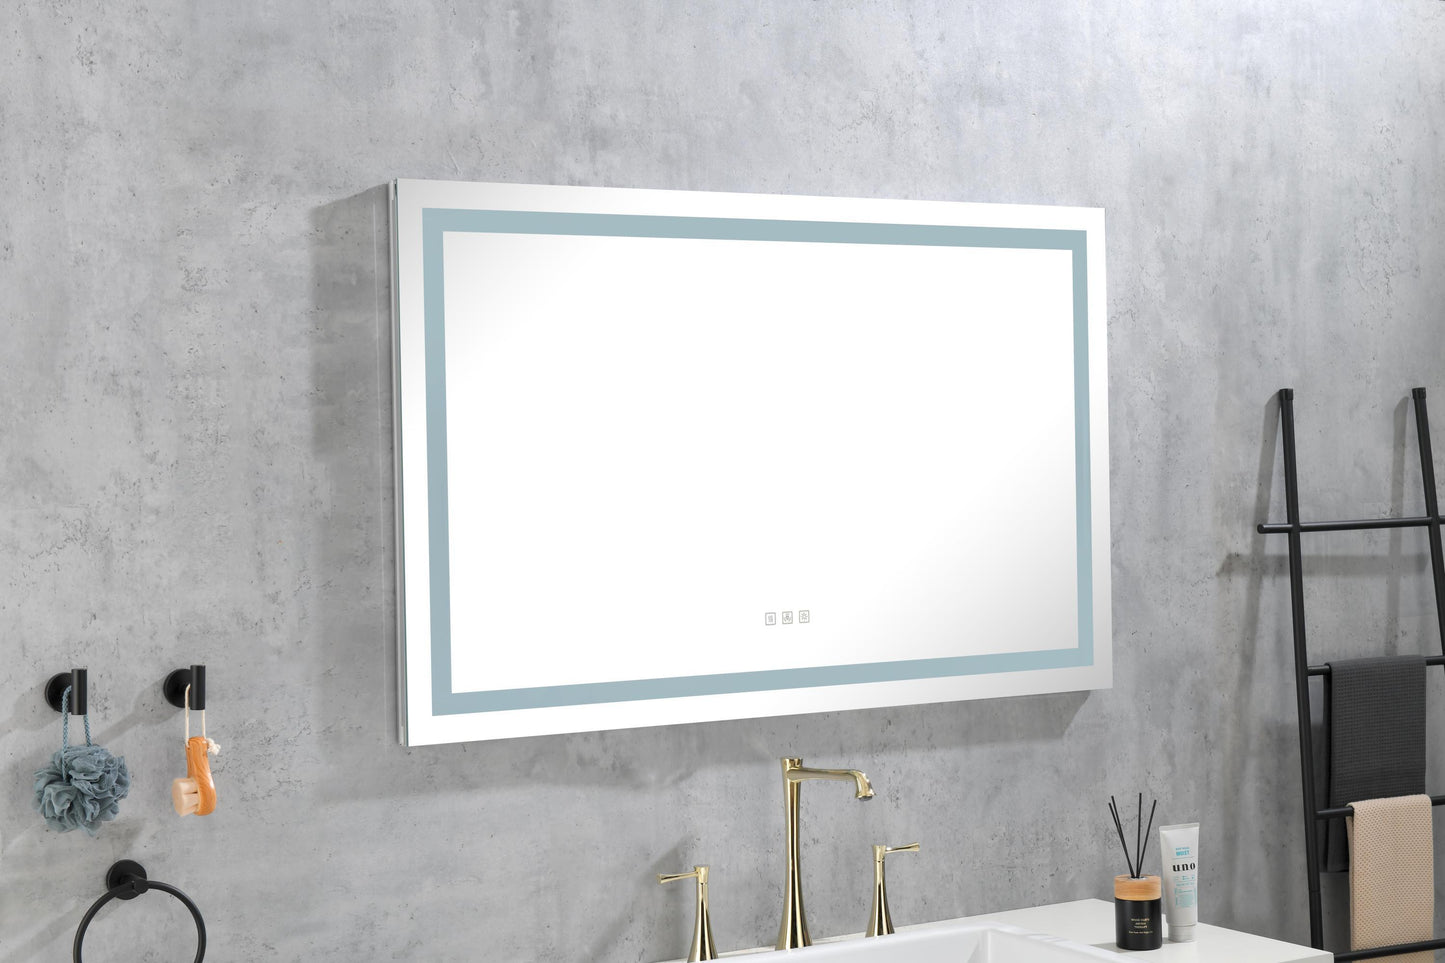 48 x 36 Inch LED Mirror Bathroom Vanity Mirrors with Lights, Wall Mounted Anti-Fog Memory Large Dimmable Front Light Makeup Mirror